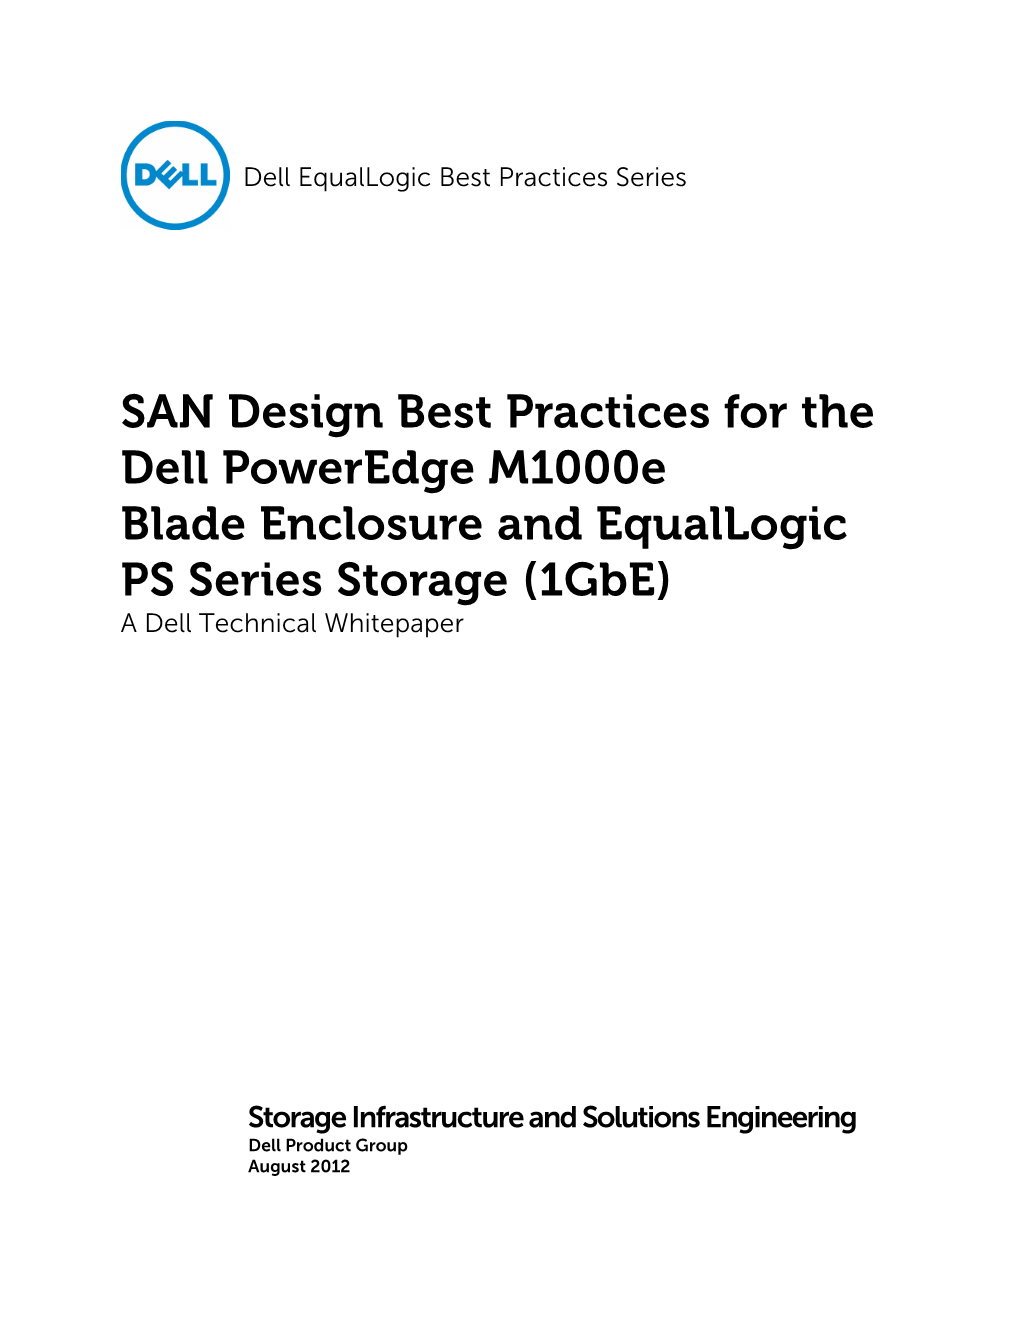 SAN Design Best Practices for M1000e Blade Servers and Equallogic PS Series Storage (1Gbe) I